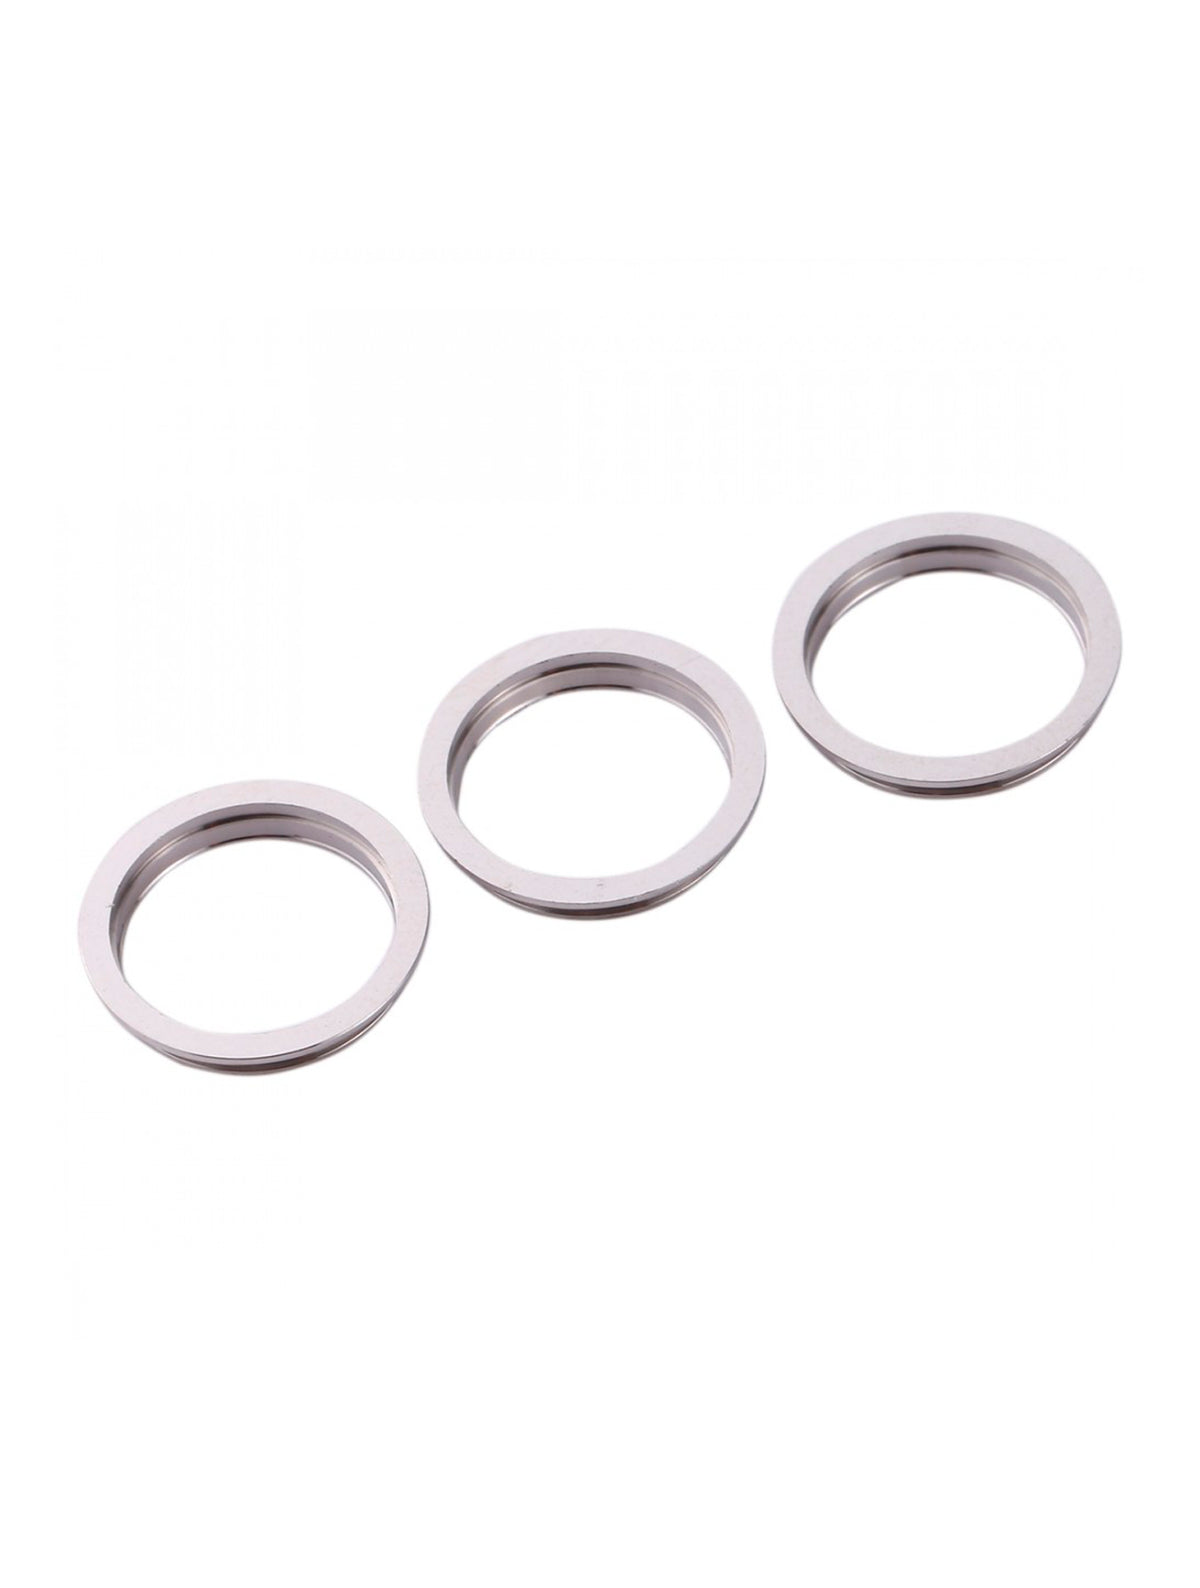 SILVER - BACK CAMERA BEZEL RING ONLY (3 PIECE SET) FOR IPHONE 12 PRO MAX (10 PACK)